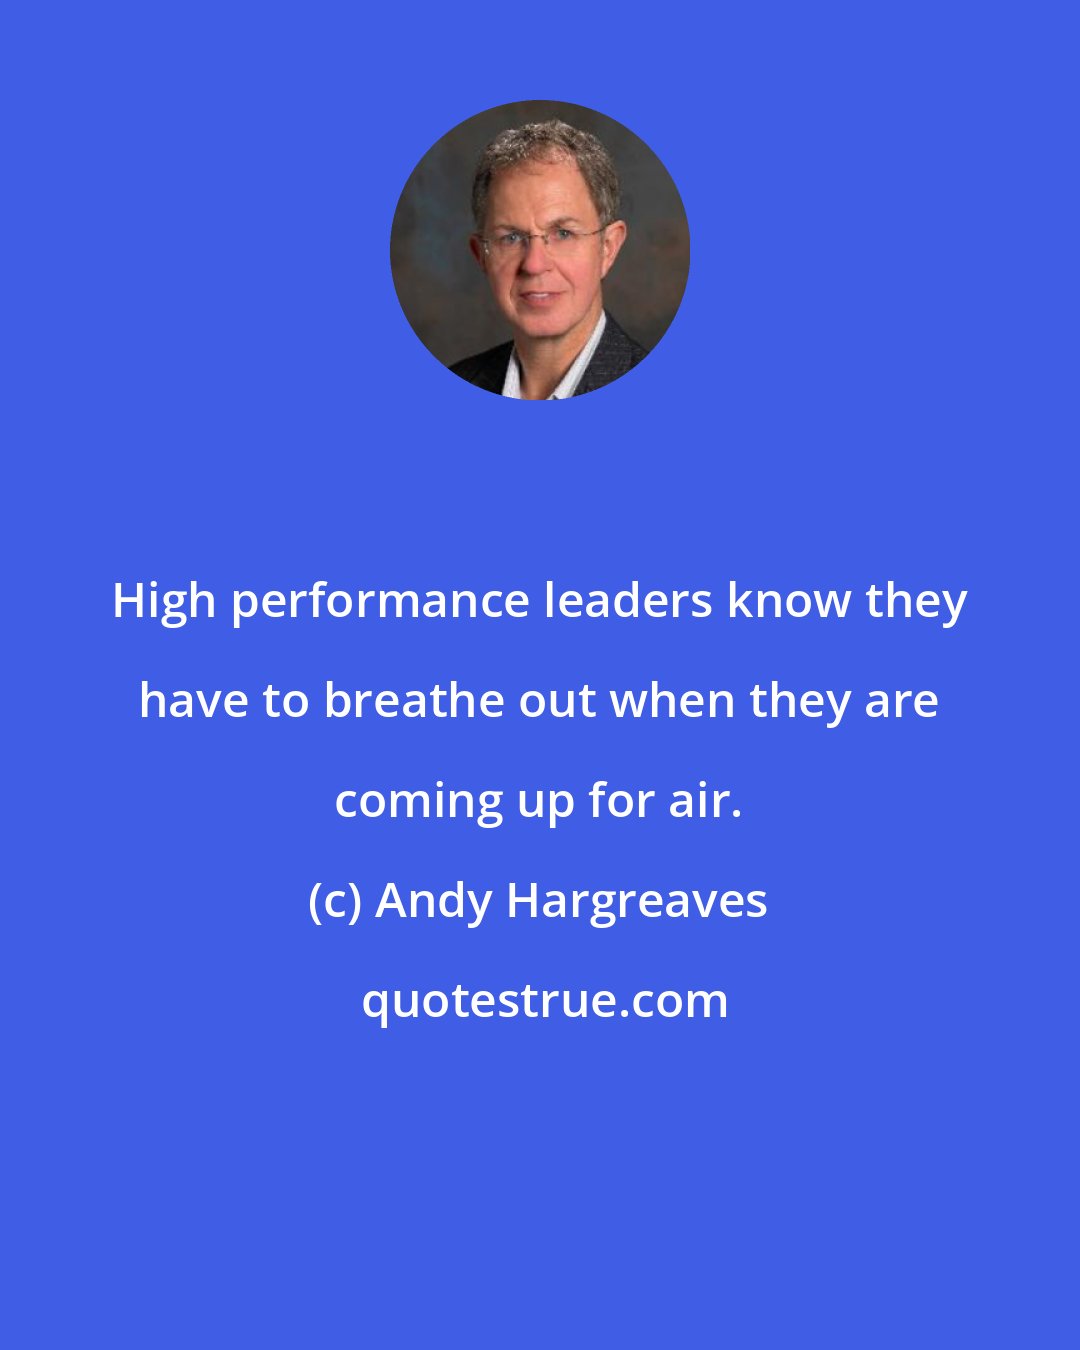 Andy Hargreaves: High performance leaders know they have to breathe out when they are coming up for air.